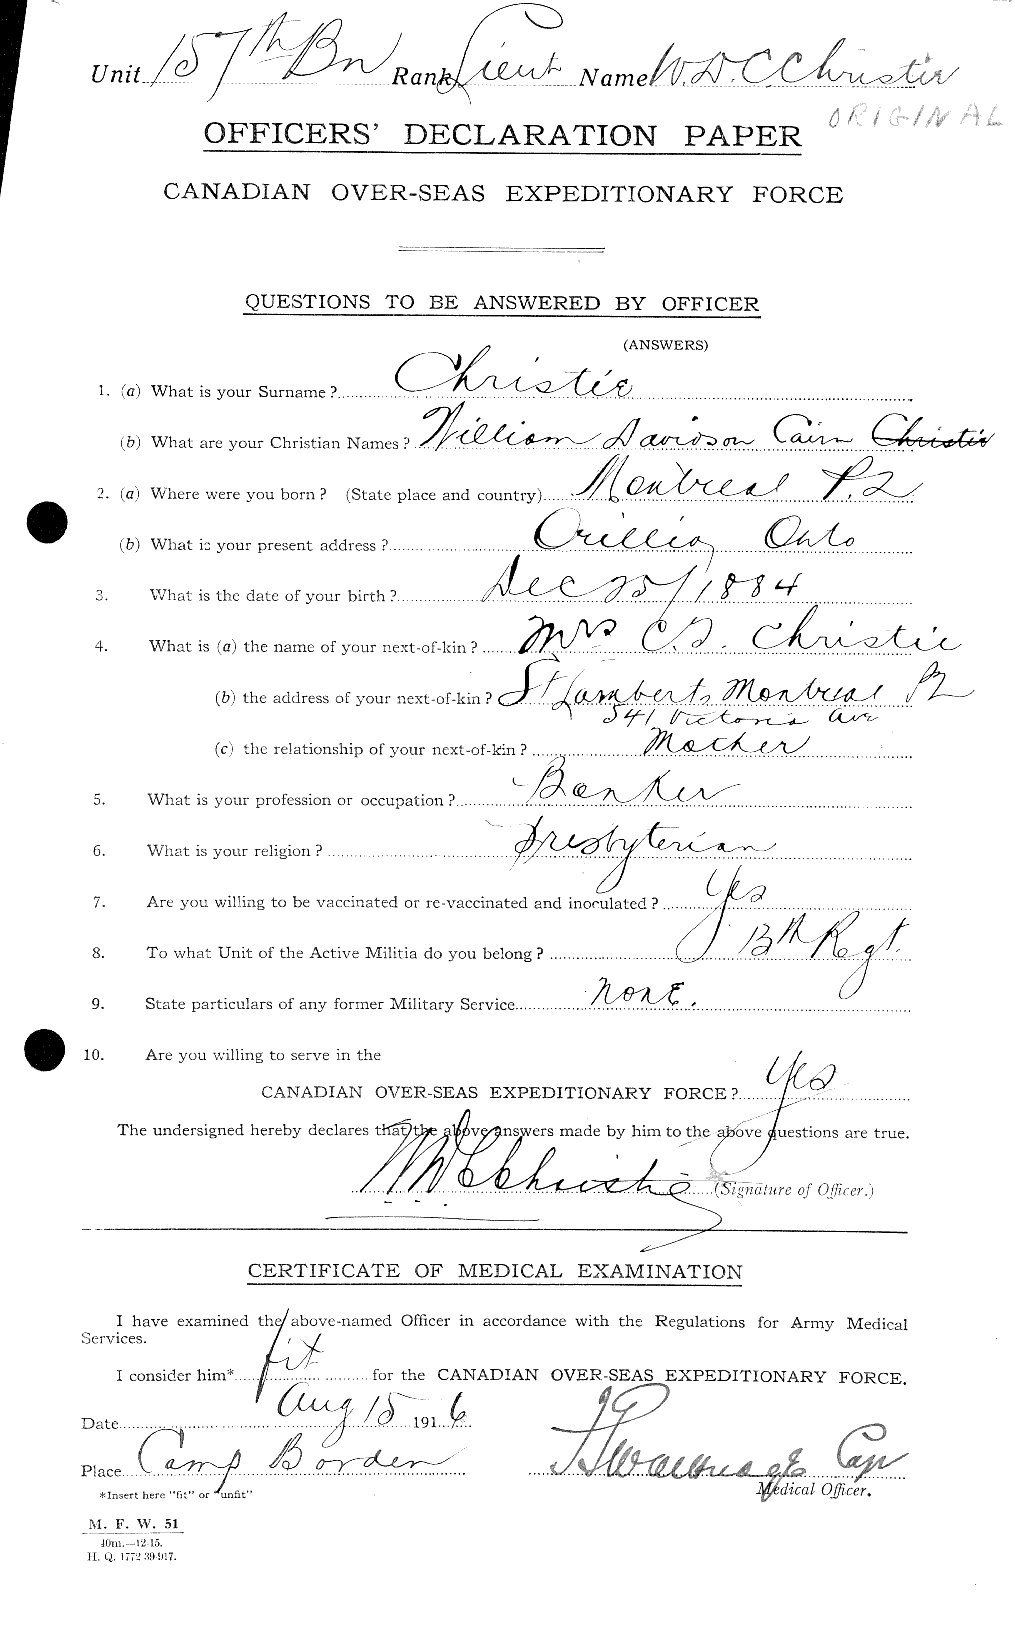 Personnel Records of the First World War - CEF 022090a